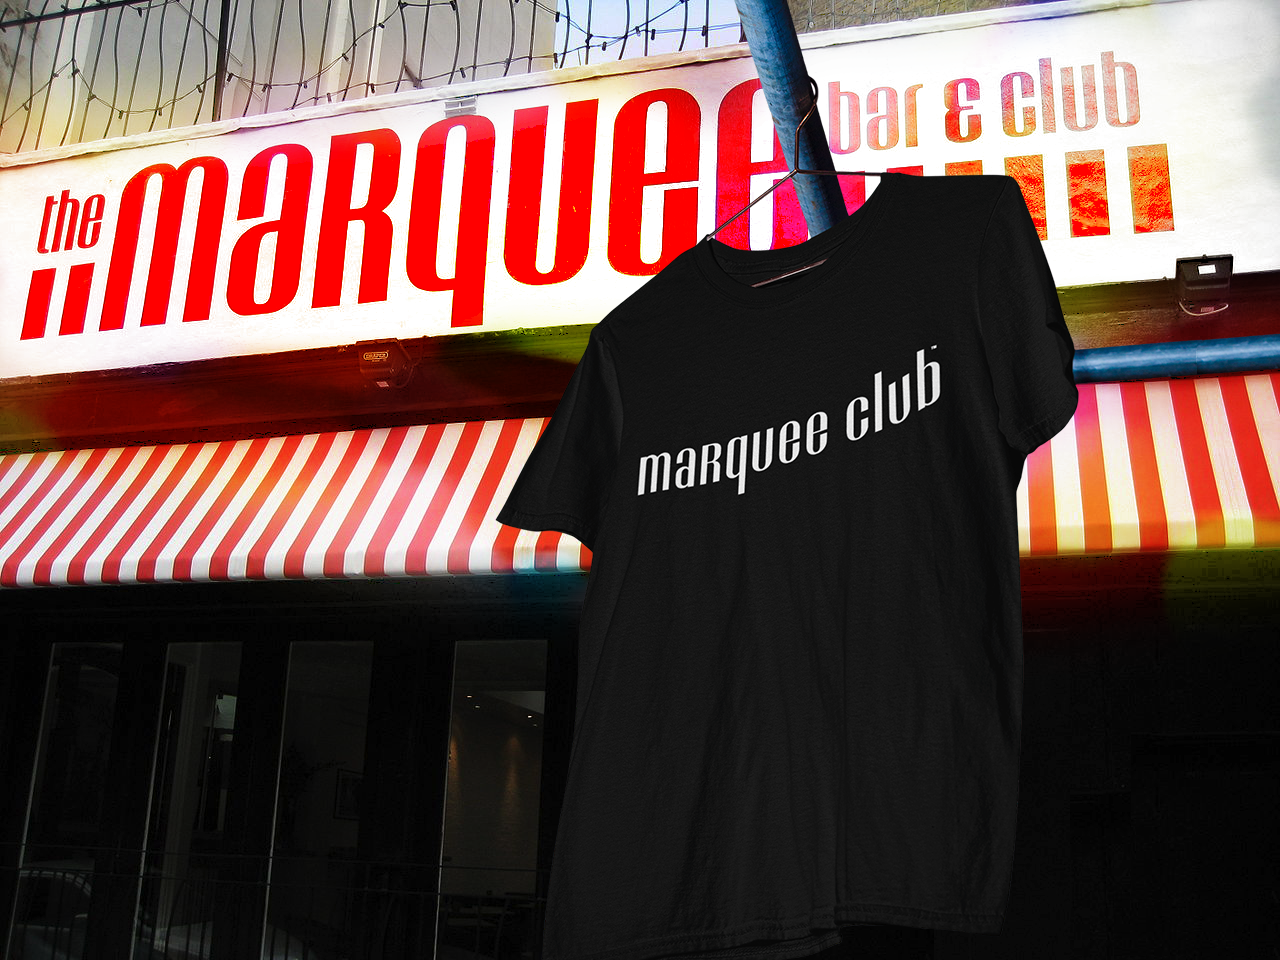 The Marquee Club image banner